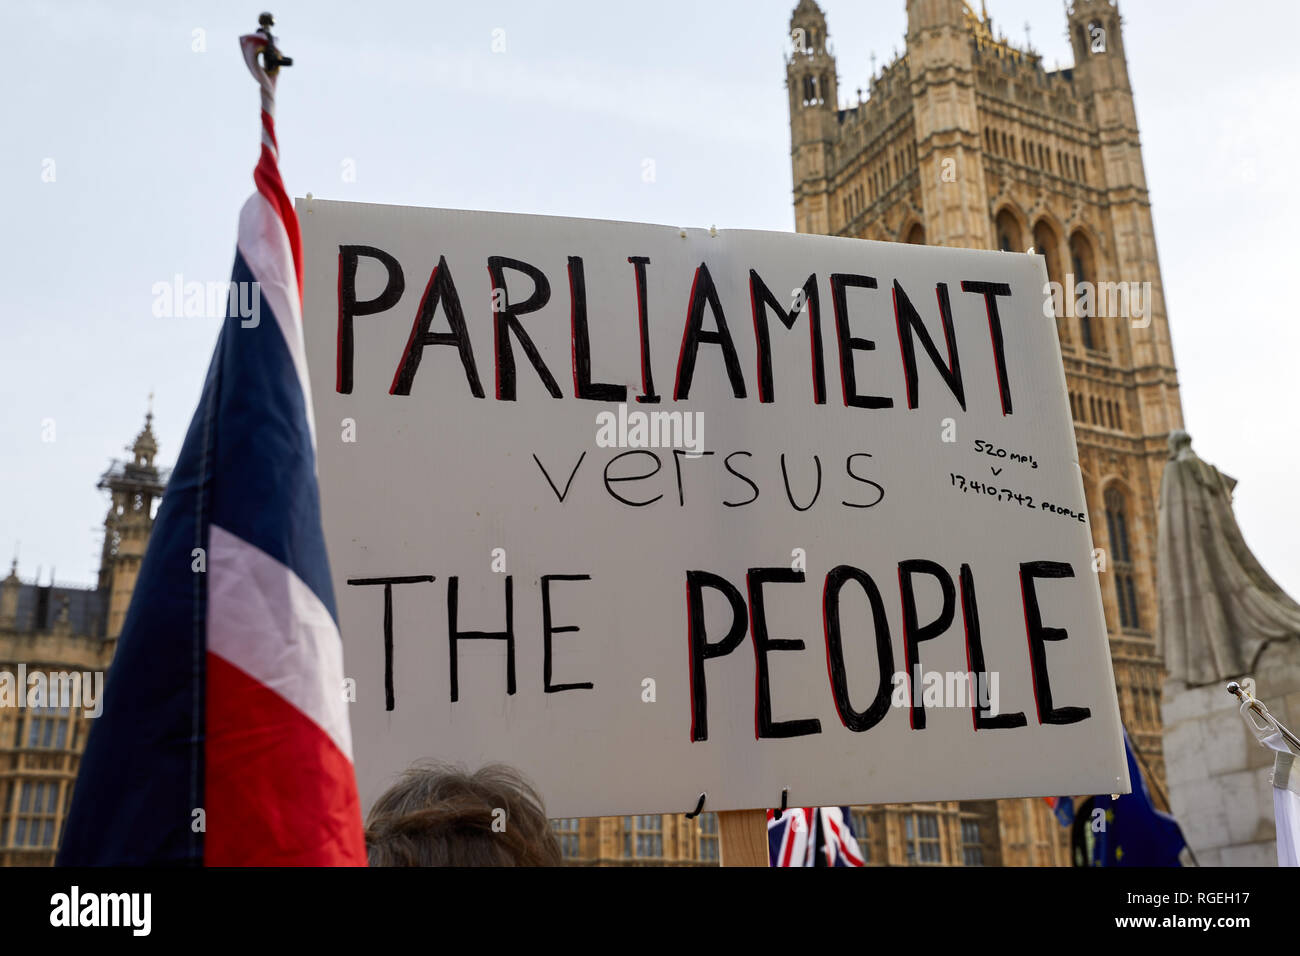 London, UK. - Jan 29, 2019: A placard held aloft opposite Parliament on a crucial day for Brexit discussion inside the House of Commons. Credit: Kevin J. Frost/Alamy Live News Stock Photo